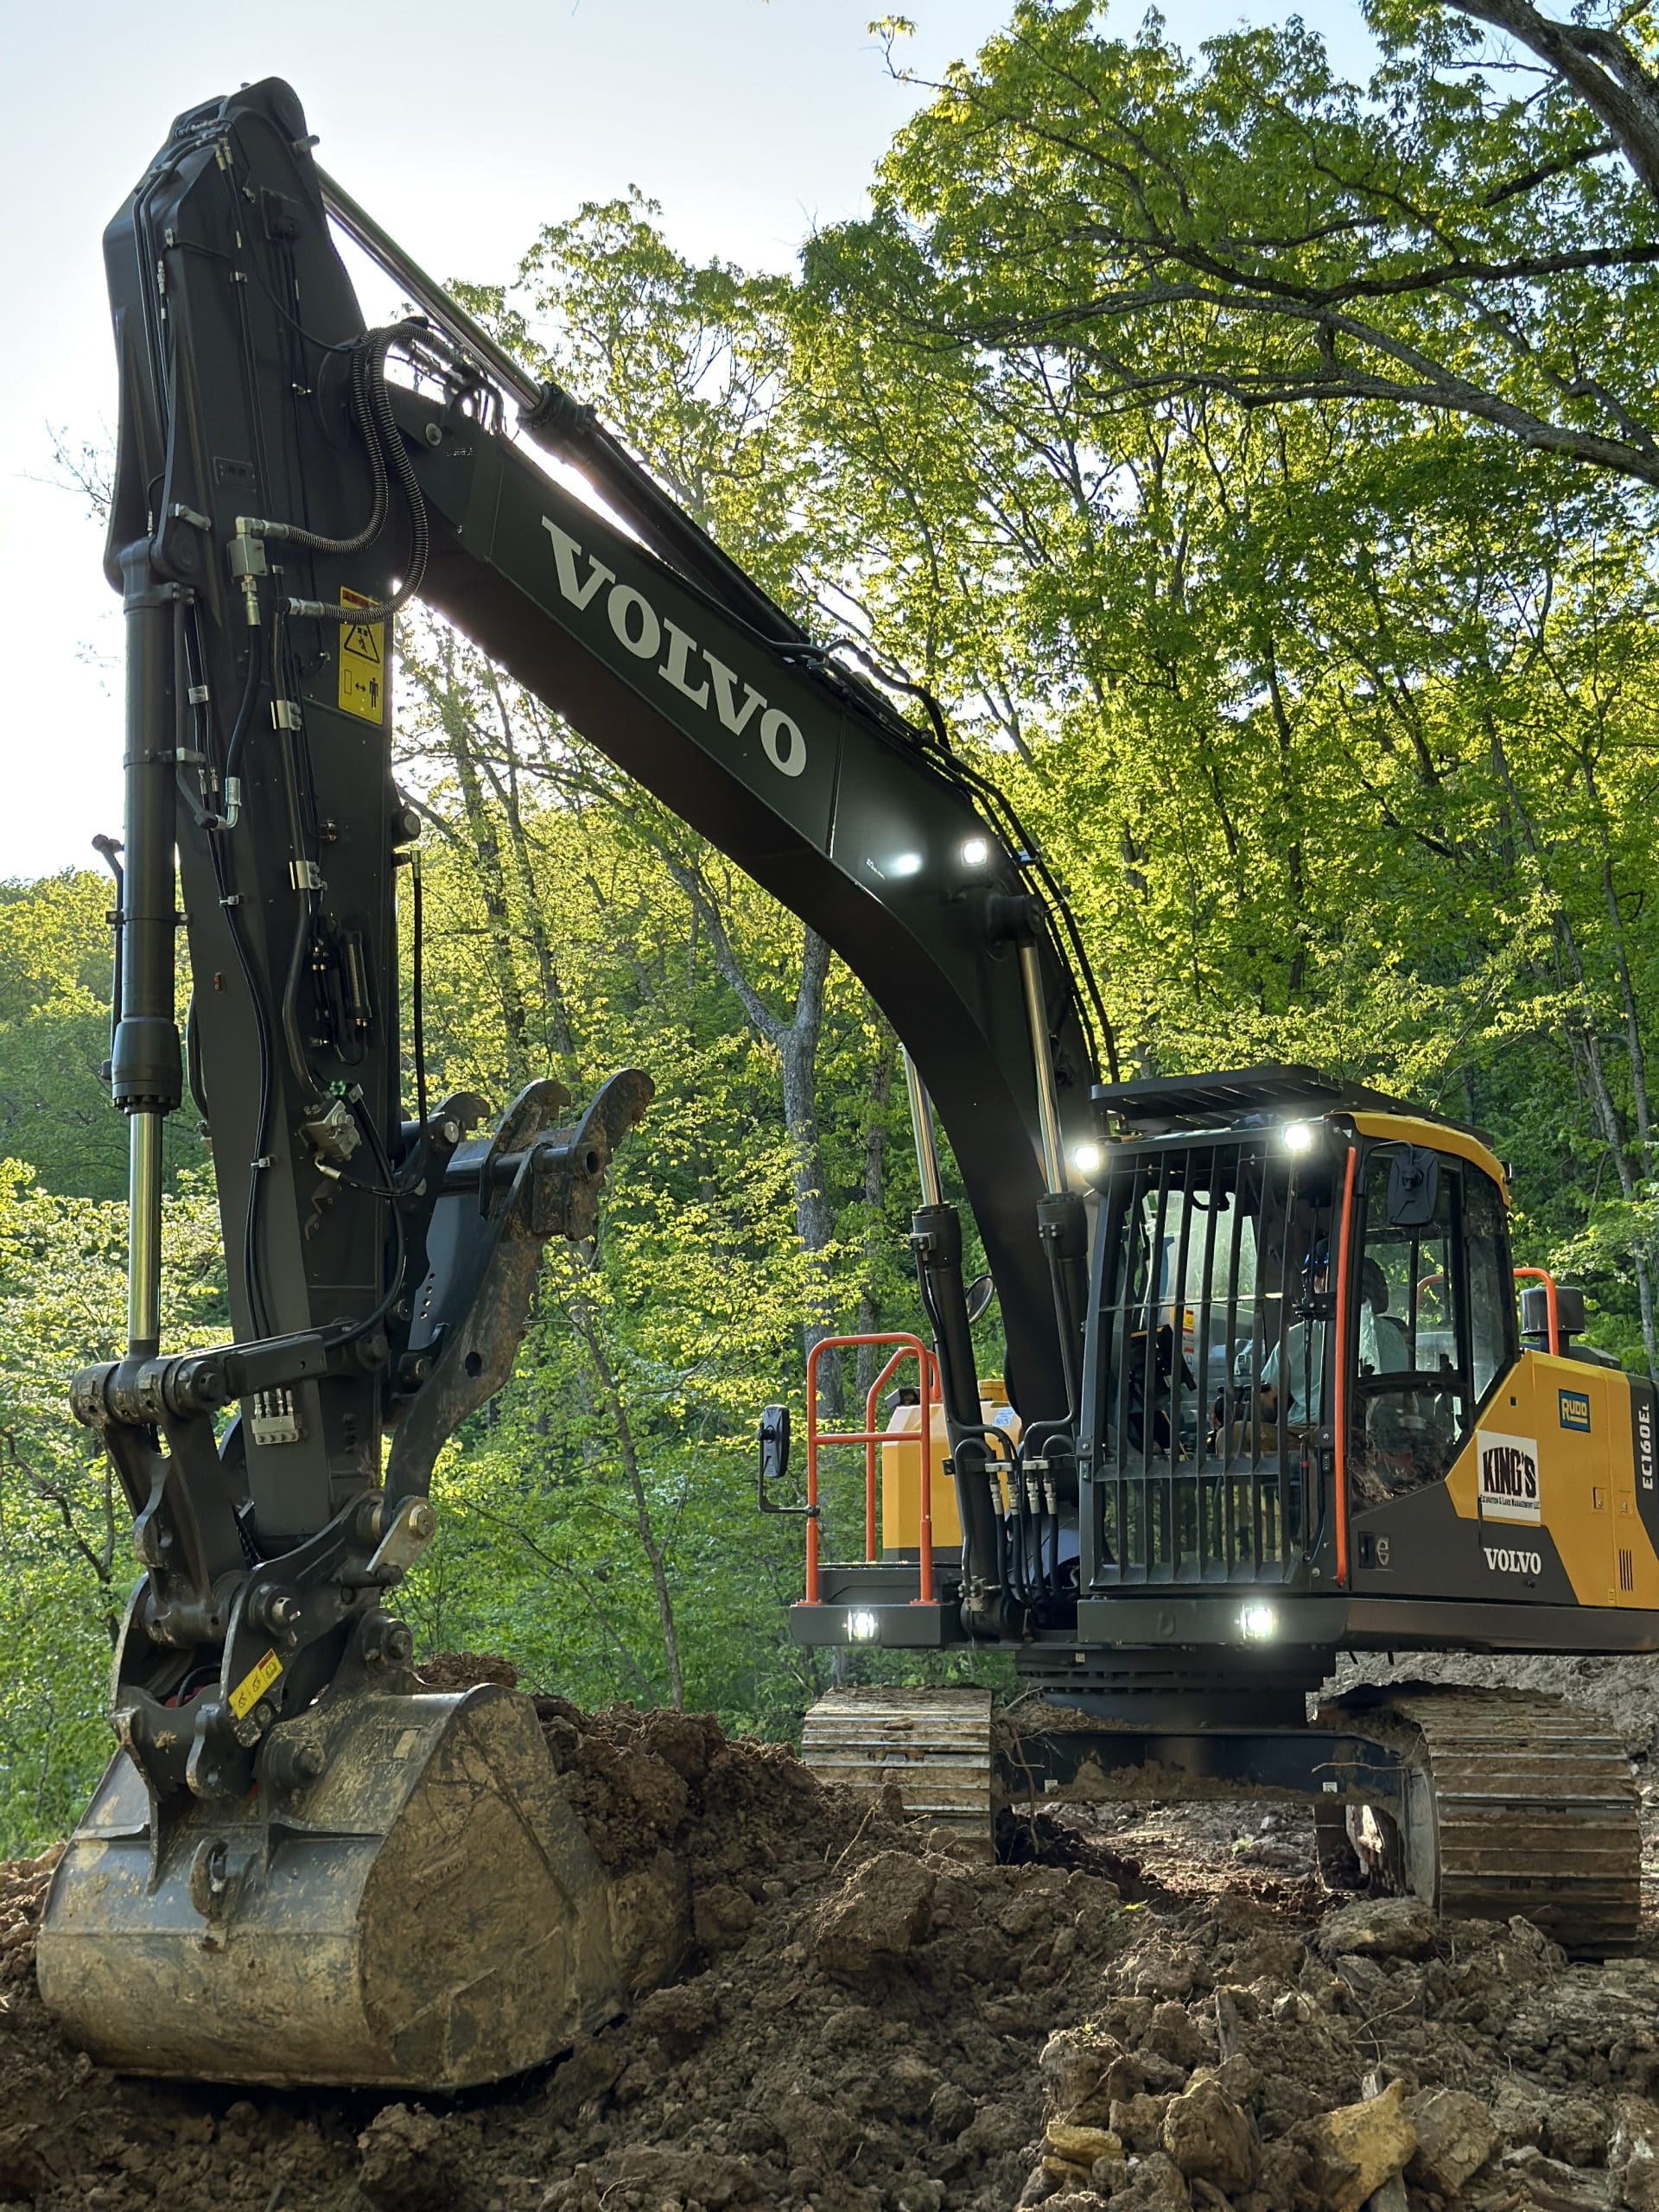 A backhoe providing forestry mulching services in the woods.